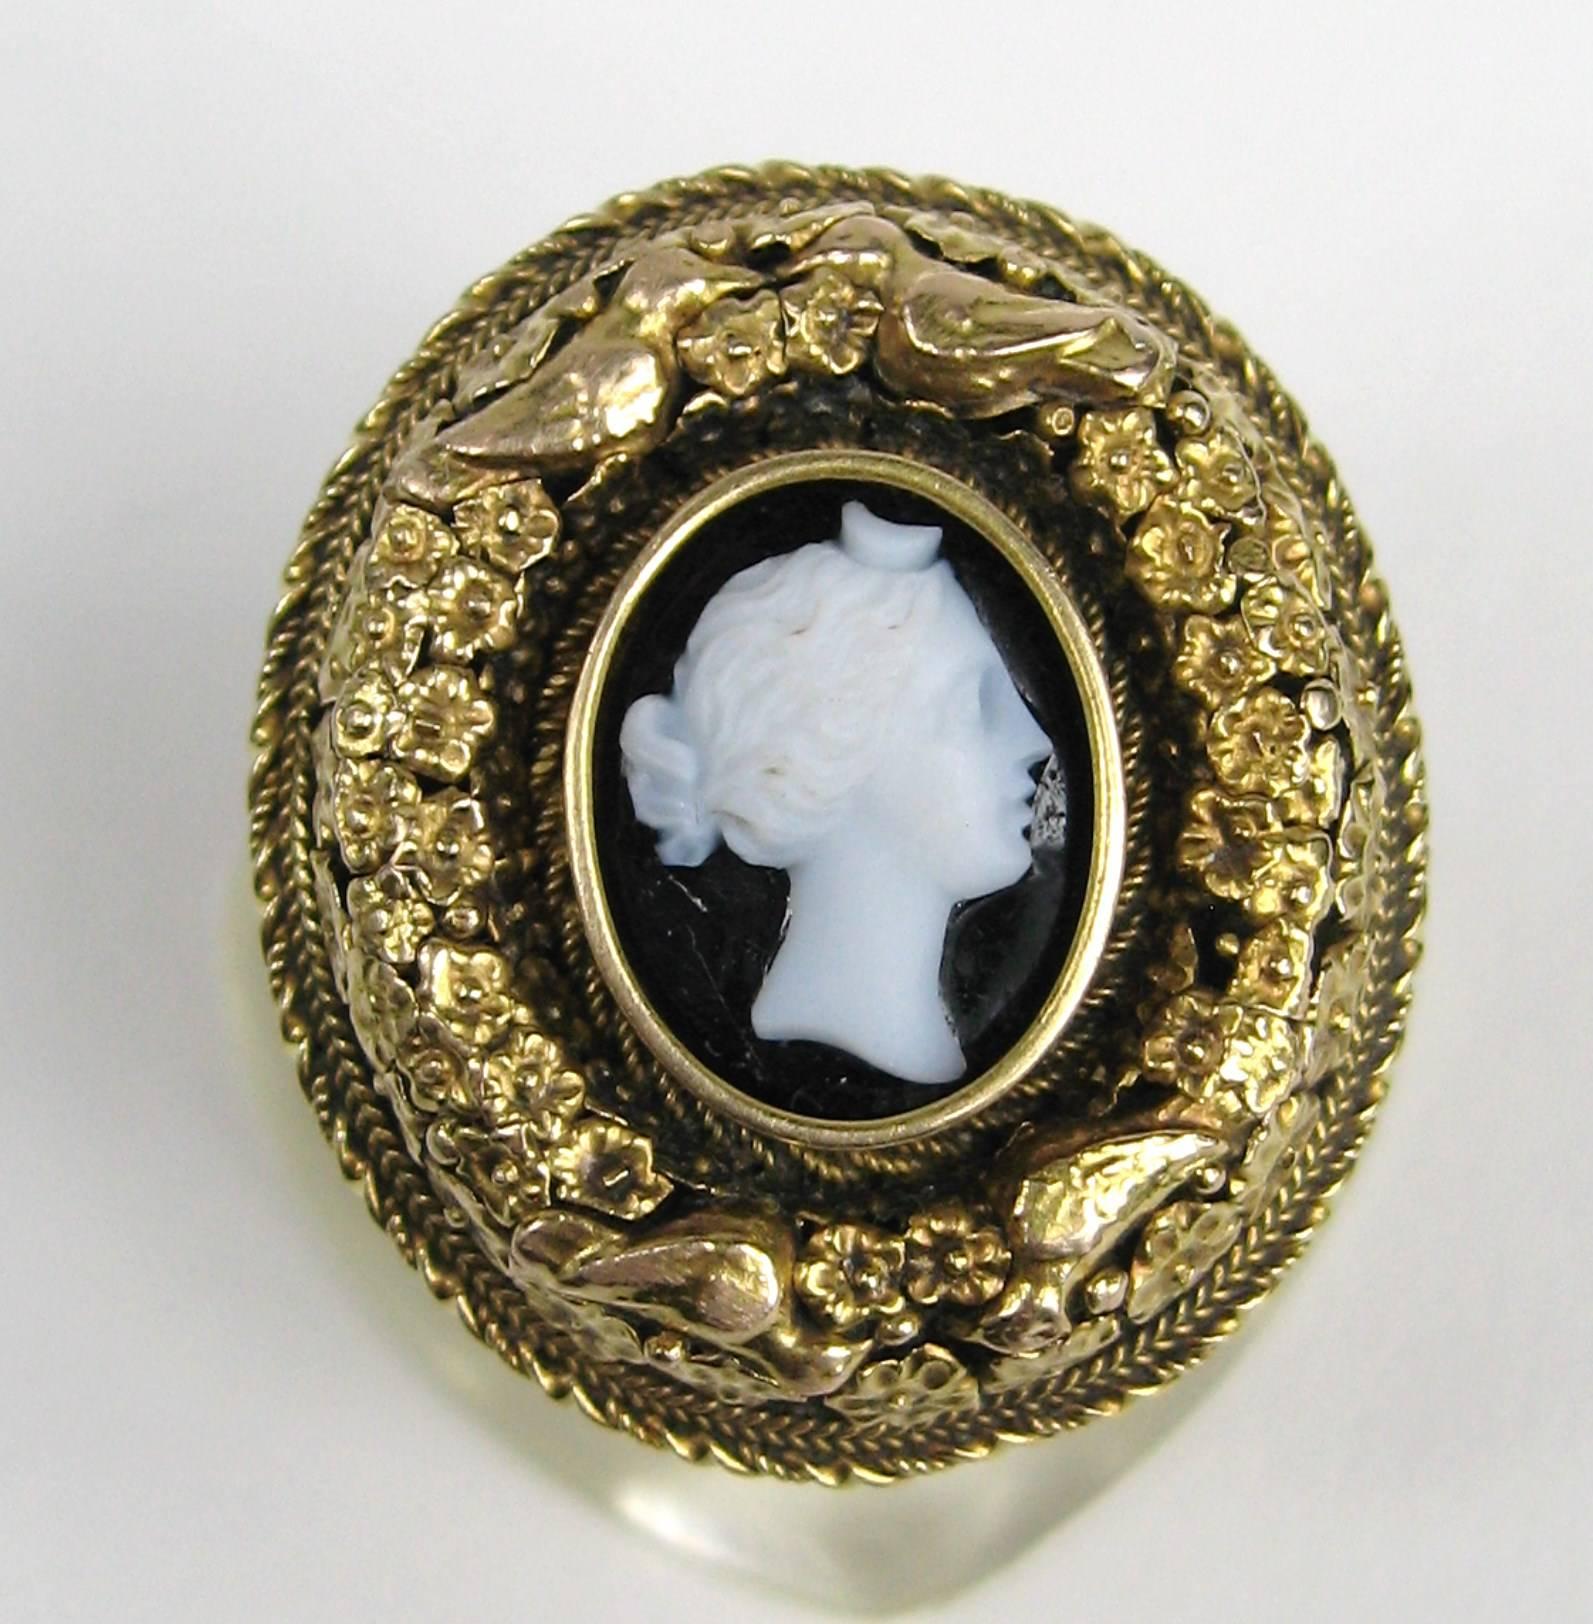 Stunning floral and birds make up the surround on this 14K gold ring. Center is a Victorian woman. Victorian later soldered onto a modern shank. The ring is large in scale measuring 1.10 in x 1 in, Ring is a size 7 and can be sized by your jeweler